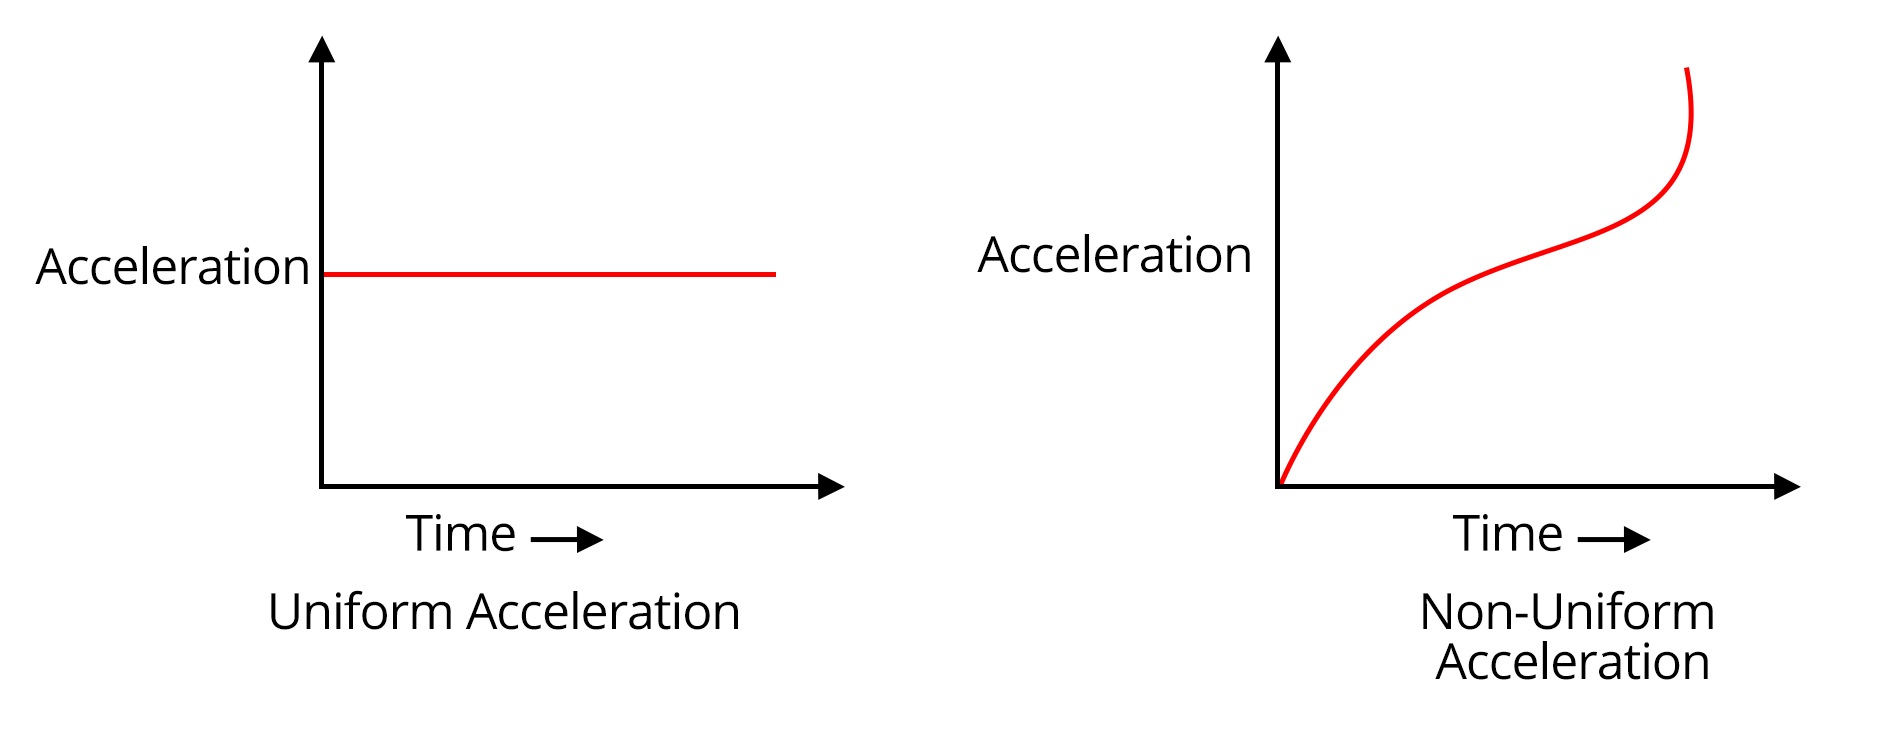 acceleration time graph for different types of motion